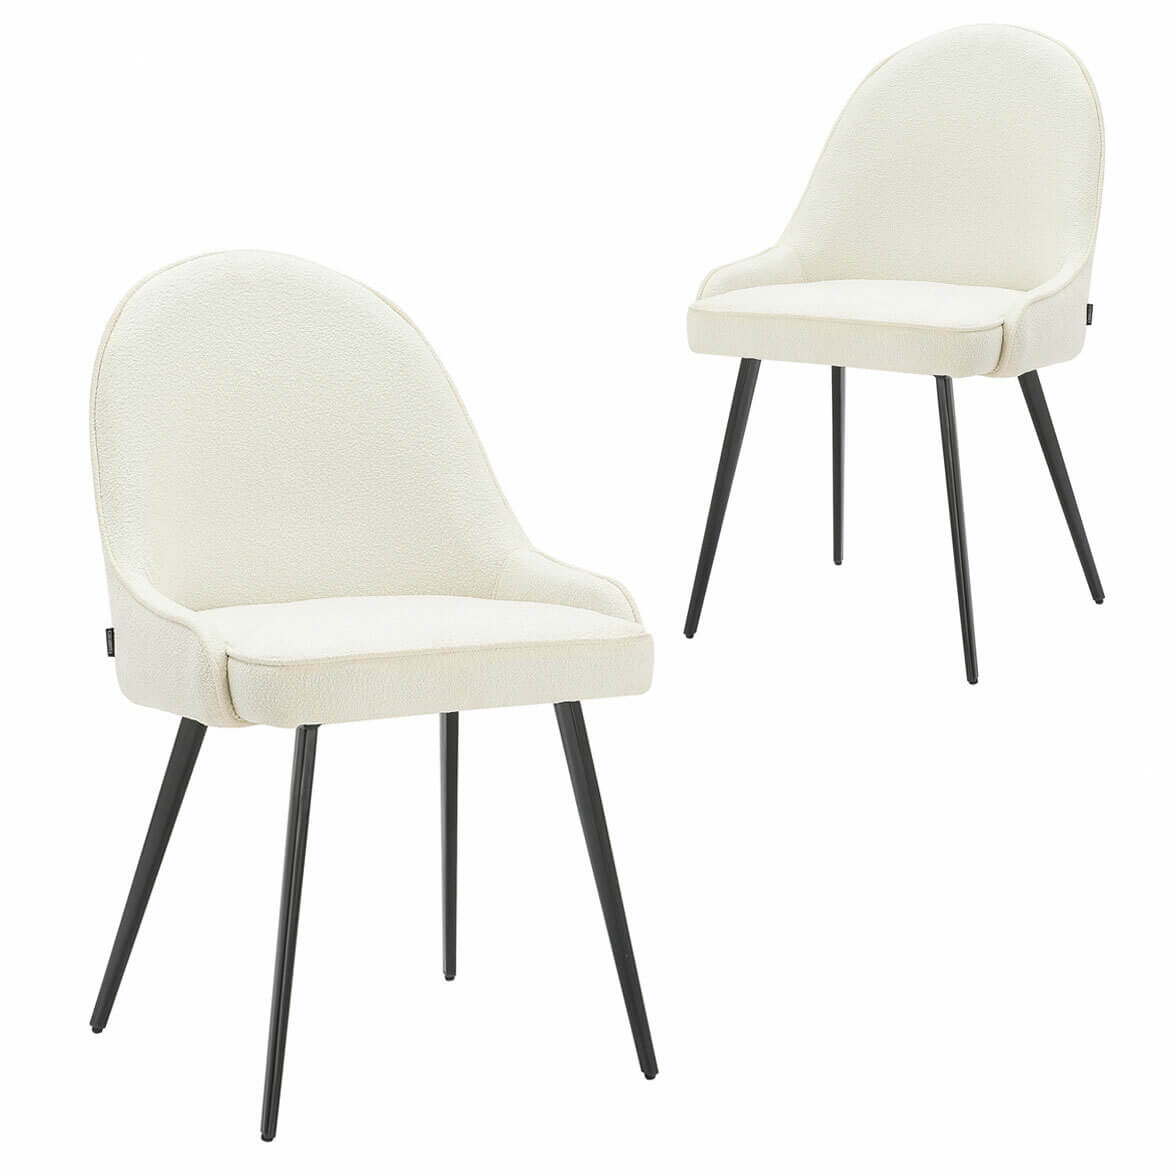 Glenbrook | Contemporary Stain Resistant Cream Fabric Dining Chairs | Set Of 2 | Cream